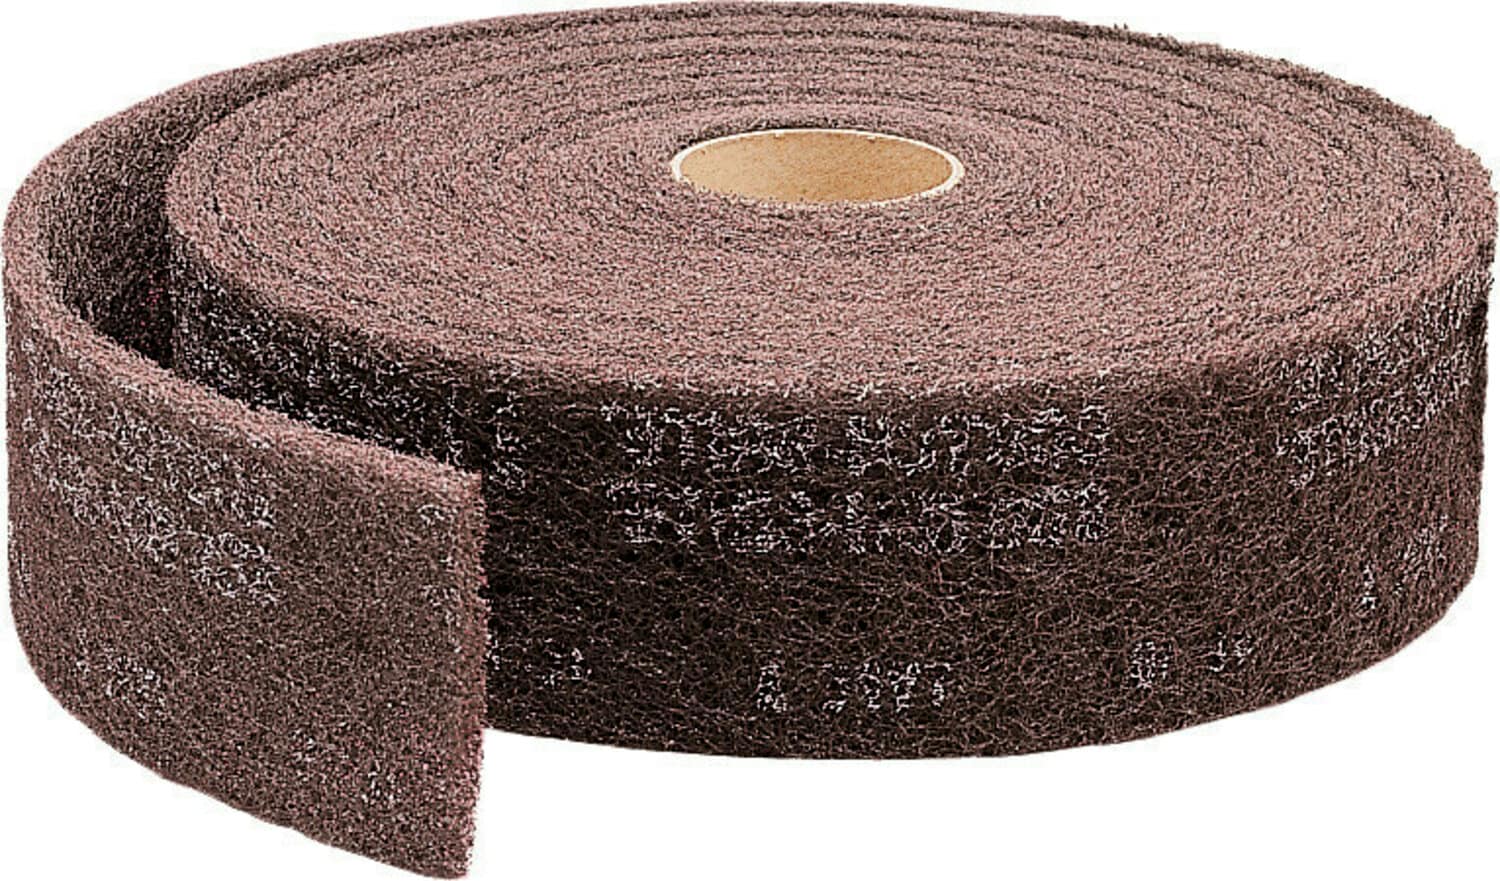 7100214886 - Scotch-Brite SE Surface Conditioning Roll, SE-RL, A/O Coarse, 50-1/2 in
x 15-1/2 ft, 1 ea/Pallet